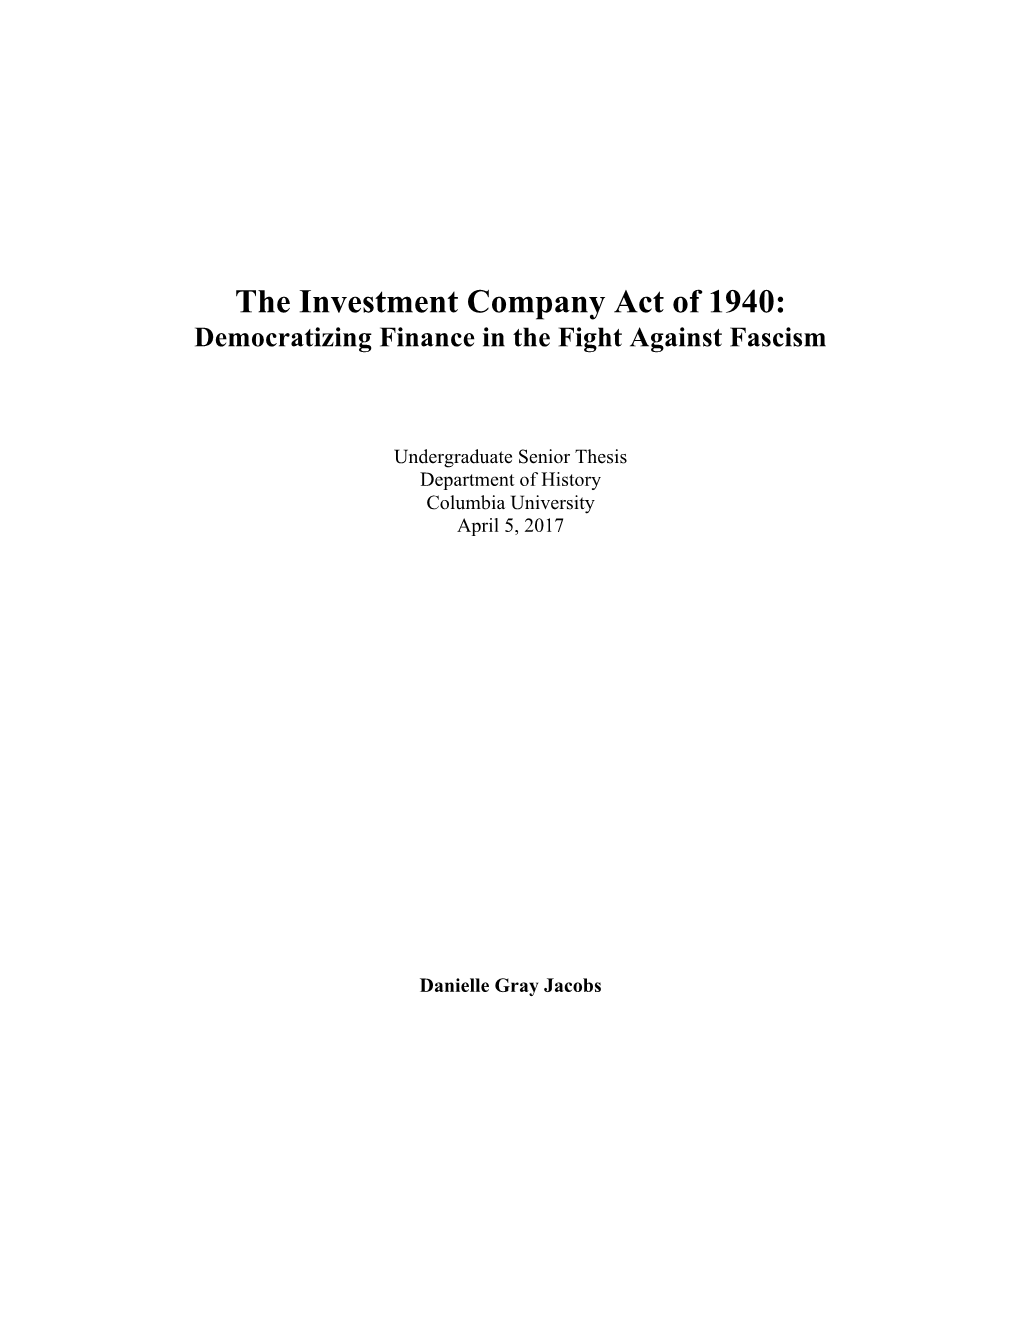 The Investment Company Act of 1940: Democratizing Finance in the Fight Against Fascism